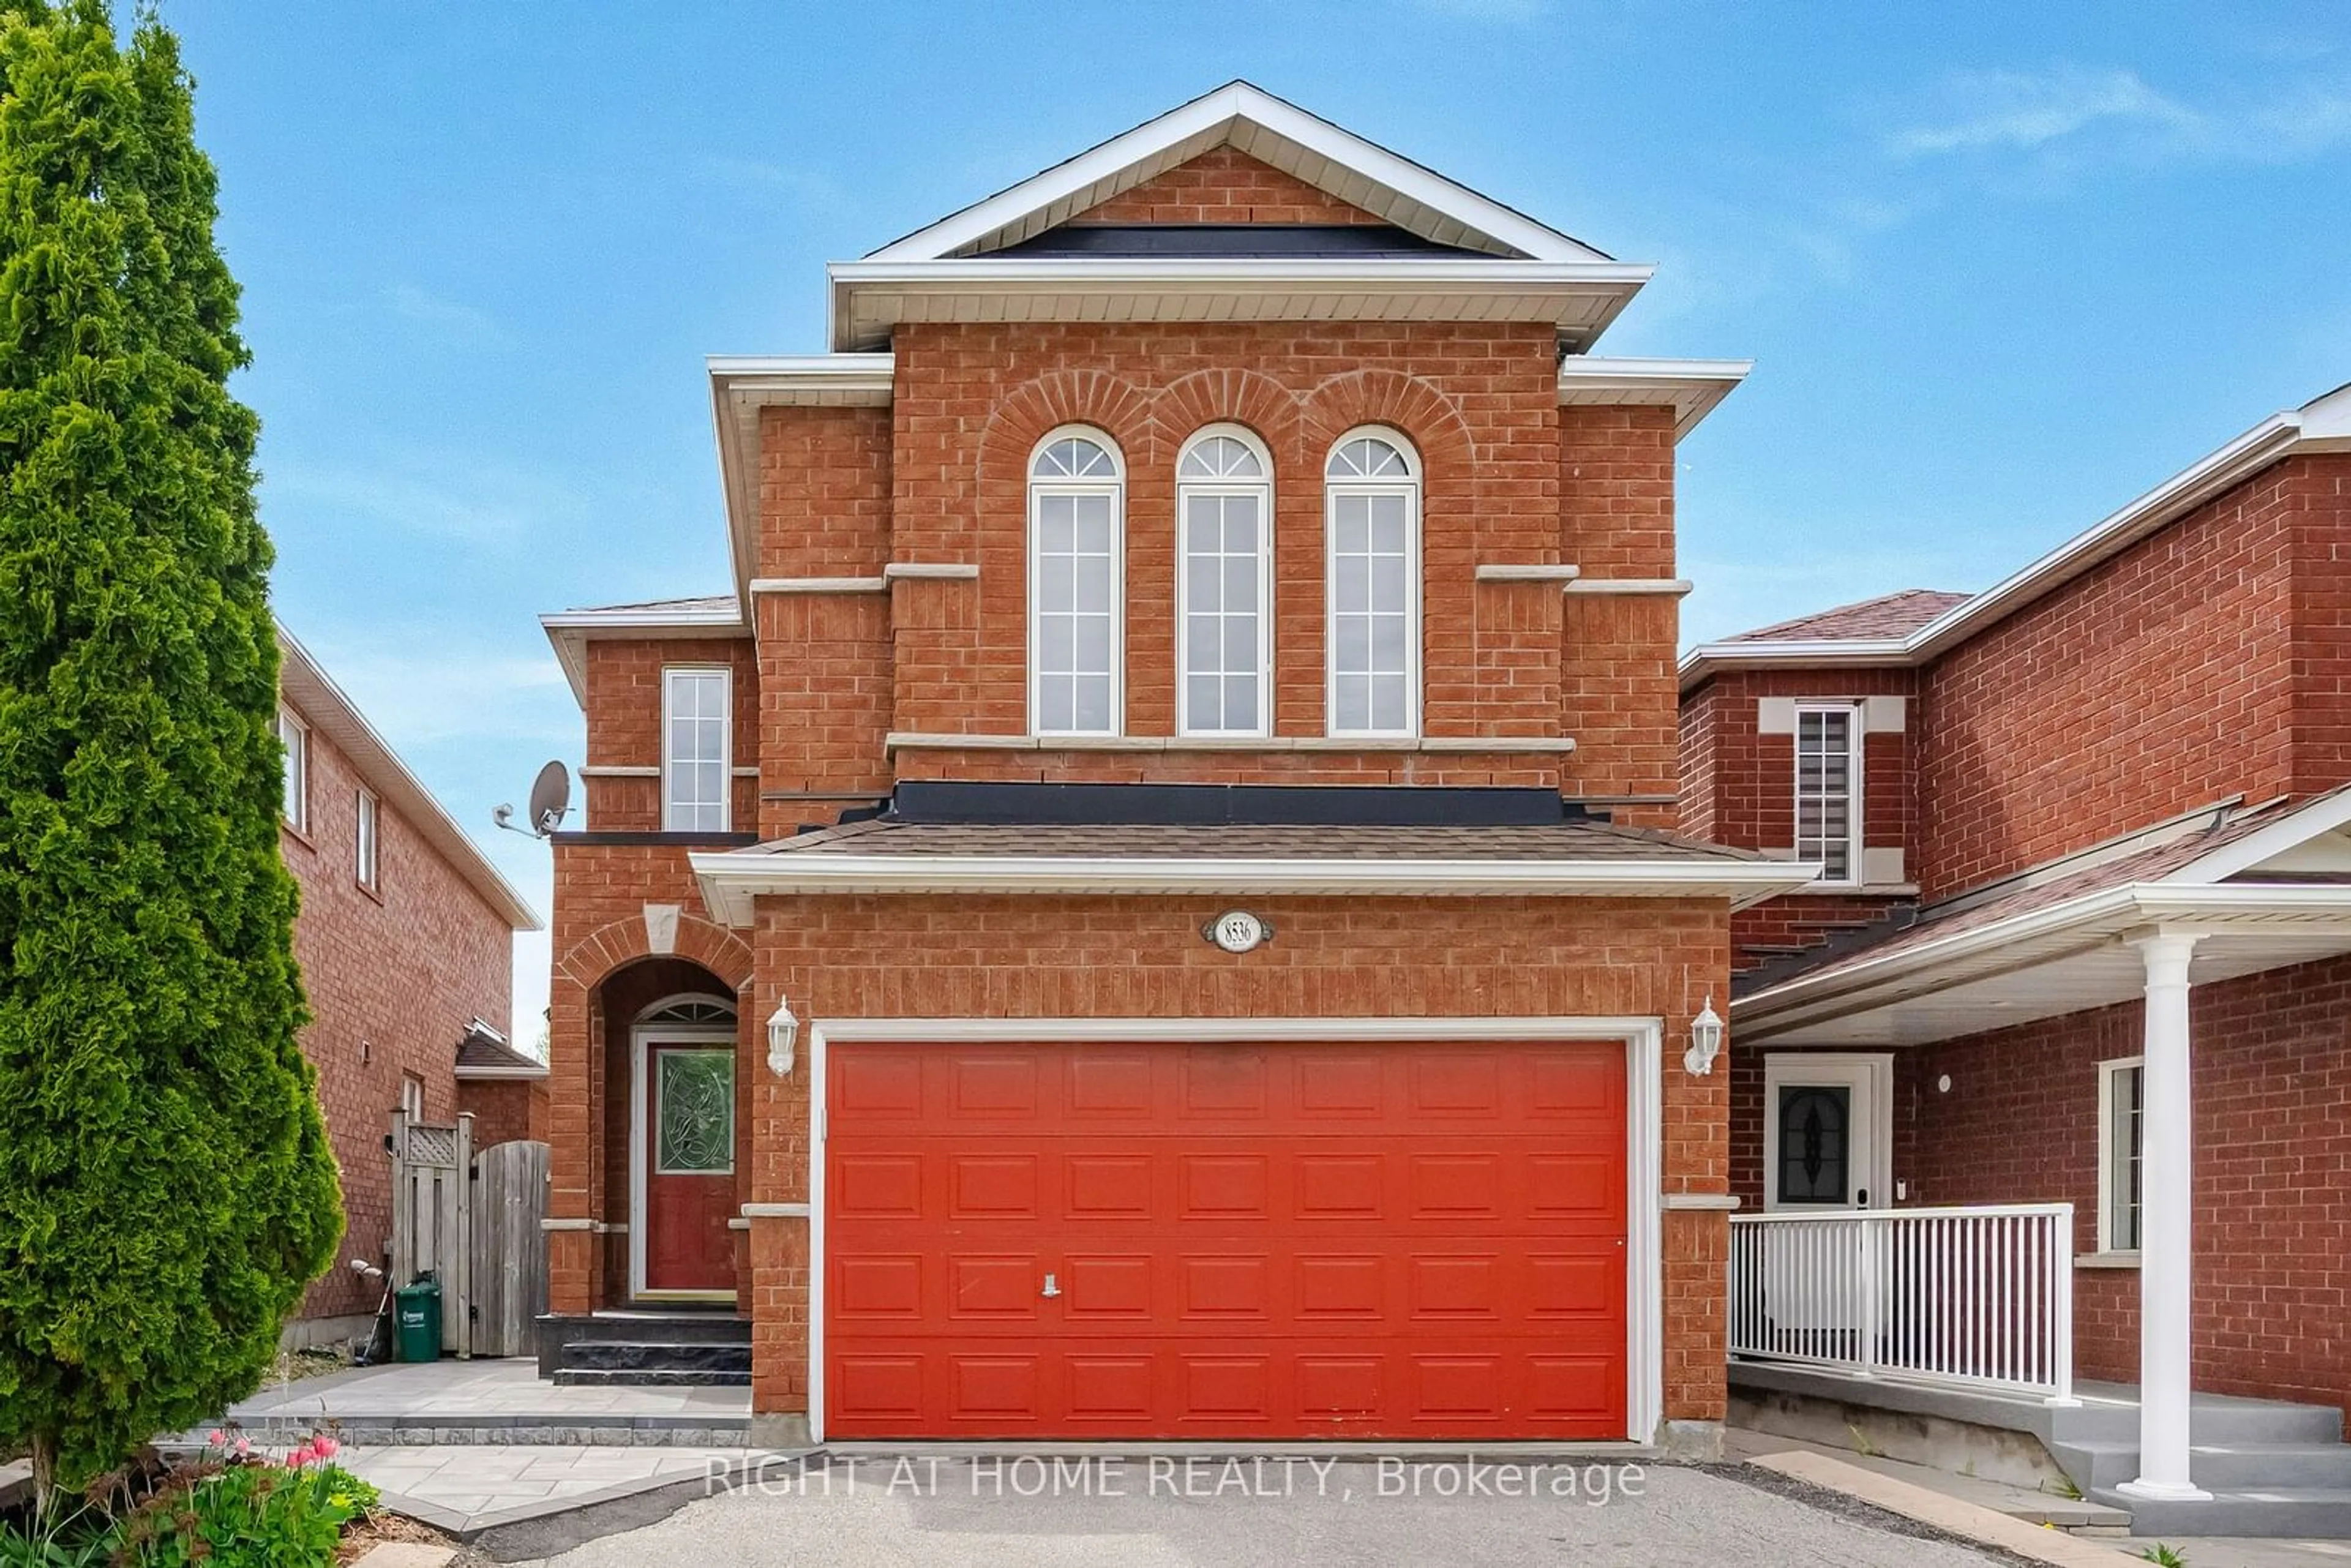 Home with brick exterior material for 8536 MARTIN GROVE Rd, Vaughan Ontario L4H 2E1